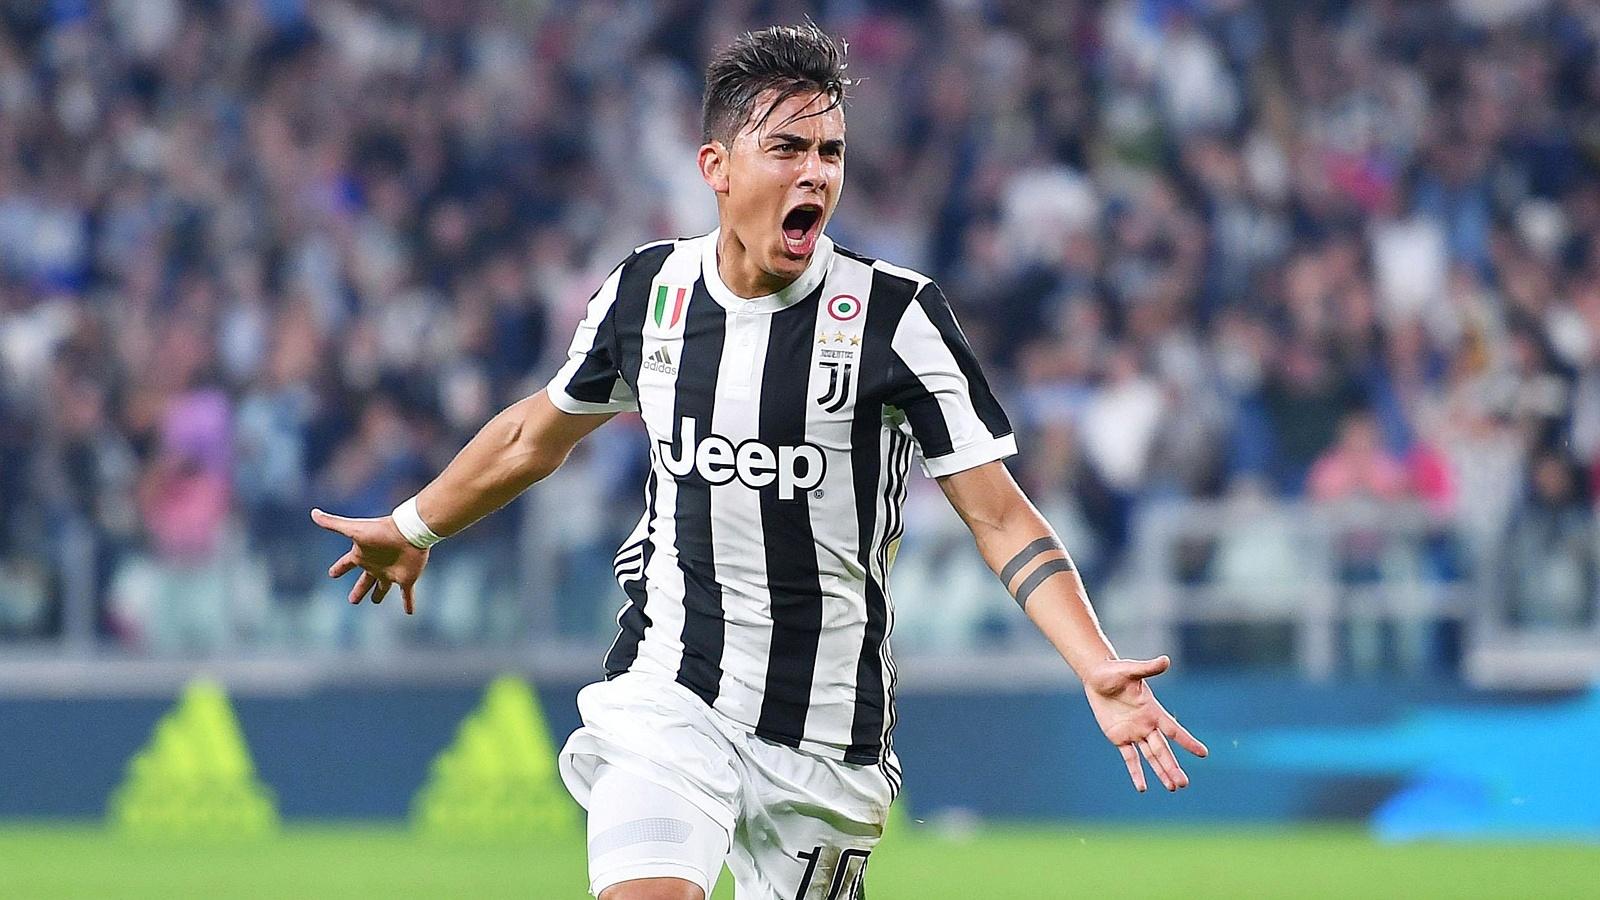 Manchester United and Arsenal make contact with the agent of Tottenham Hotspur target Paulo Dybala.